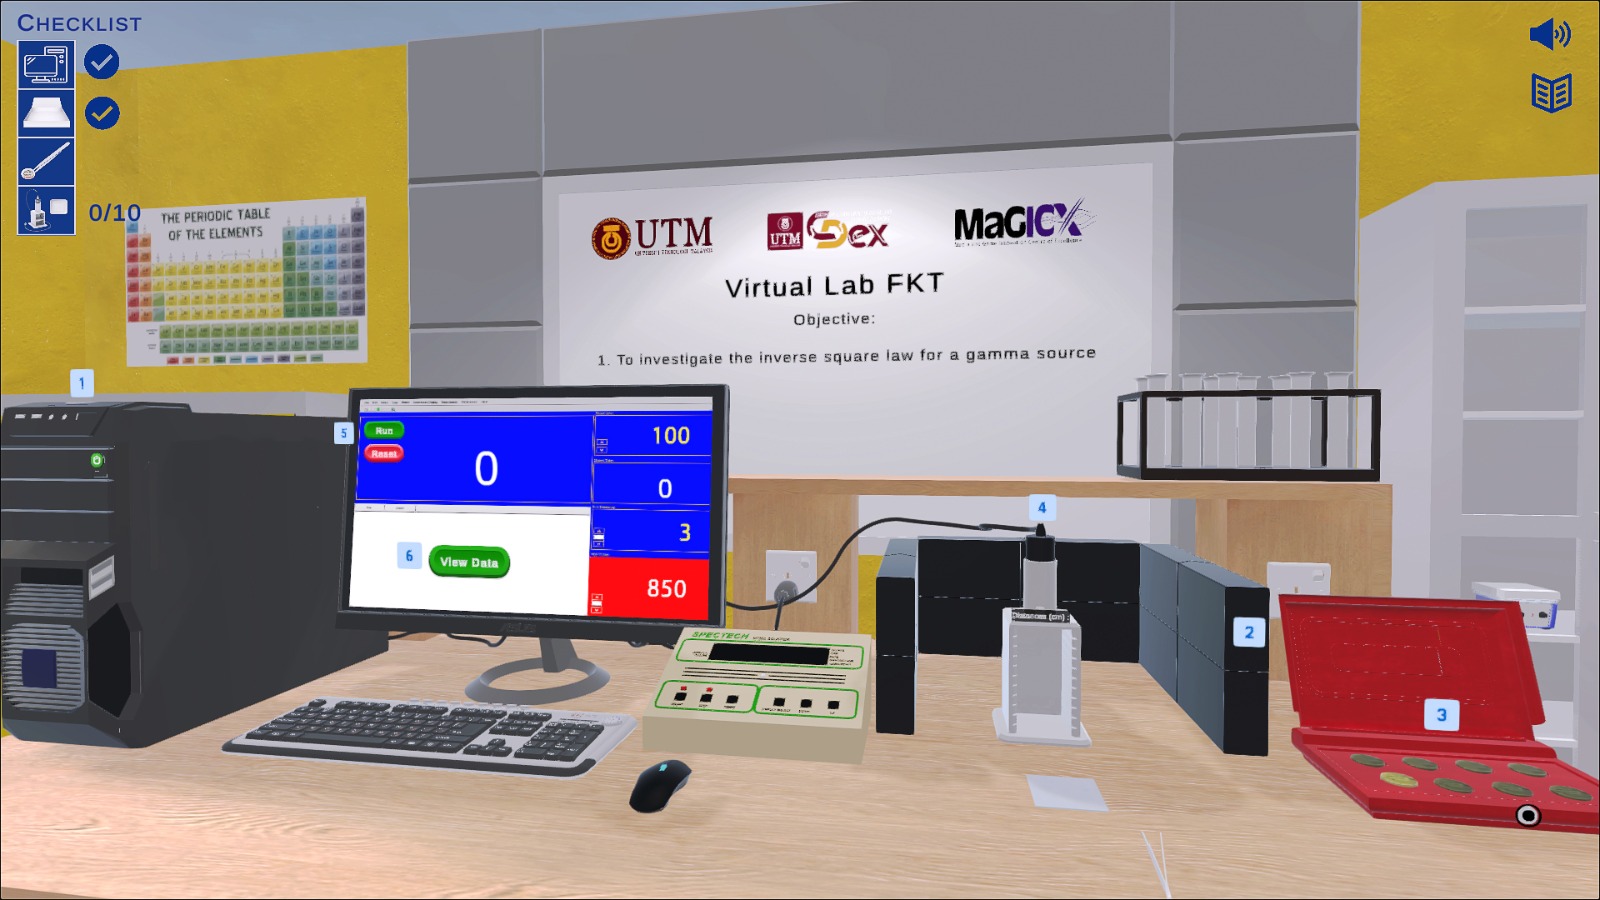 WELCOME TO UTM VIRTUAL LAB